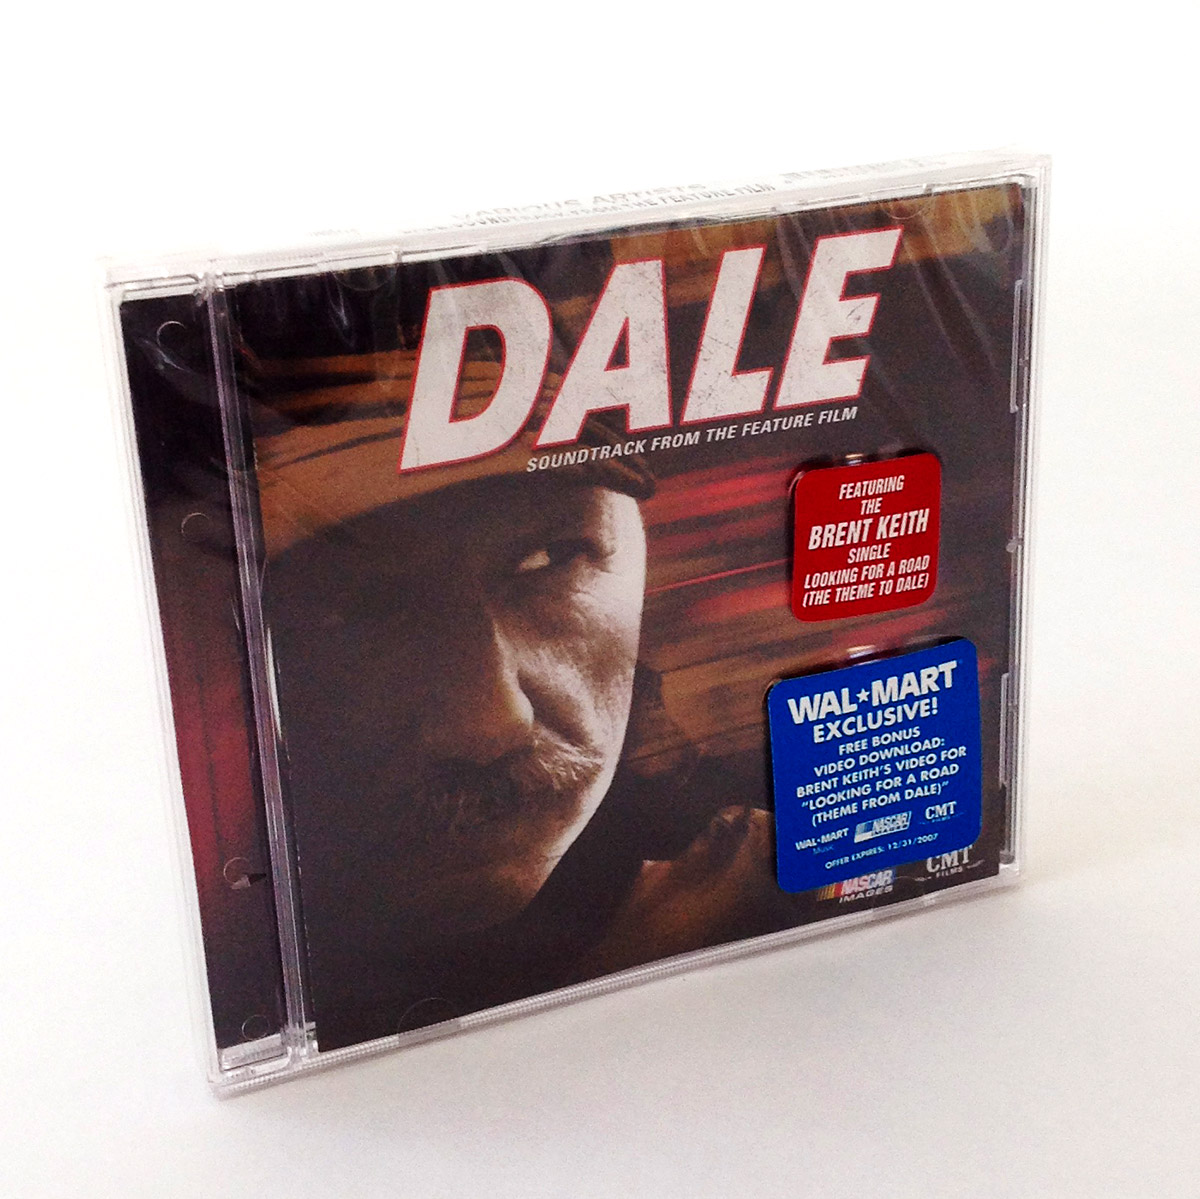 Dale Soundtrack — CD/Compact Disc Replication by OMM